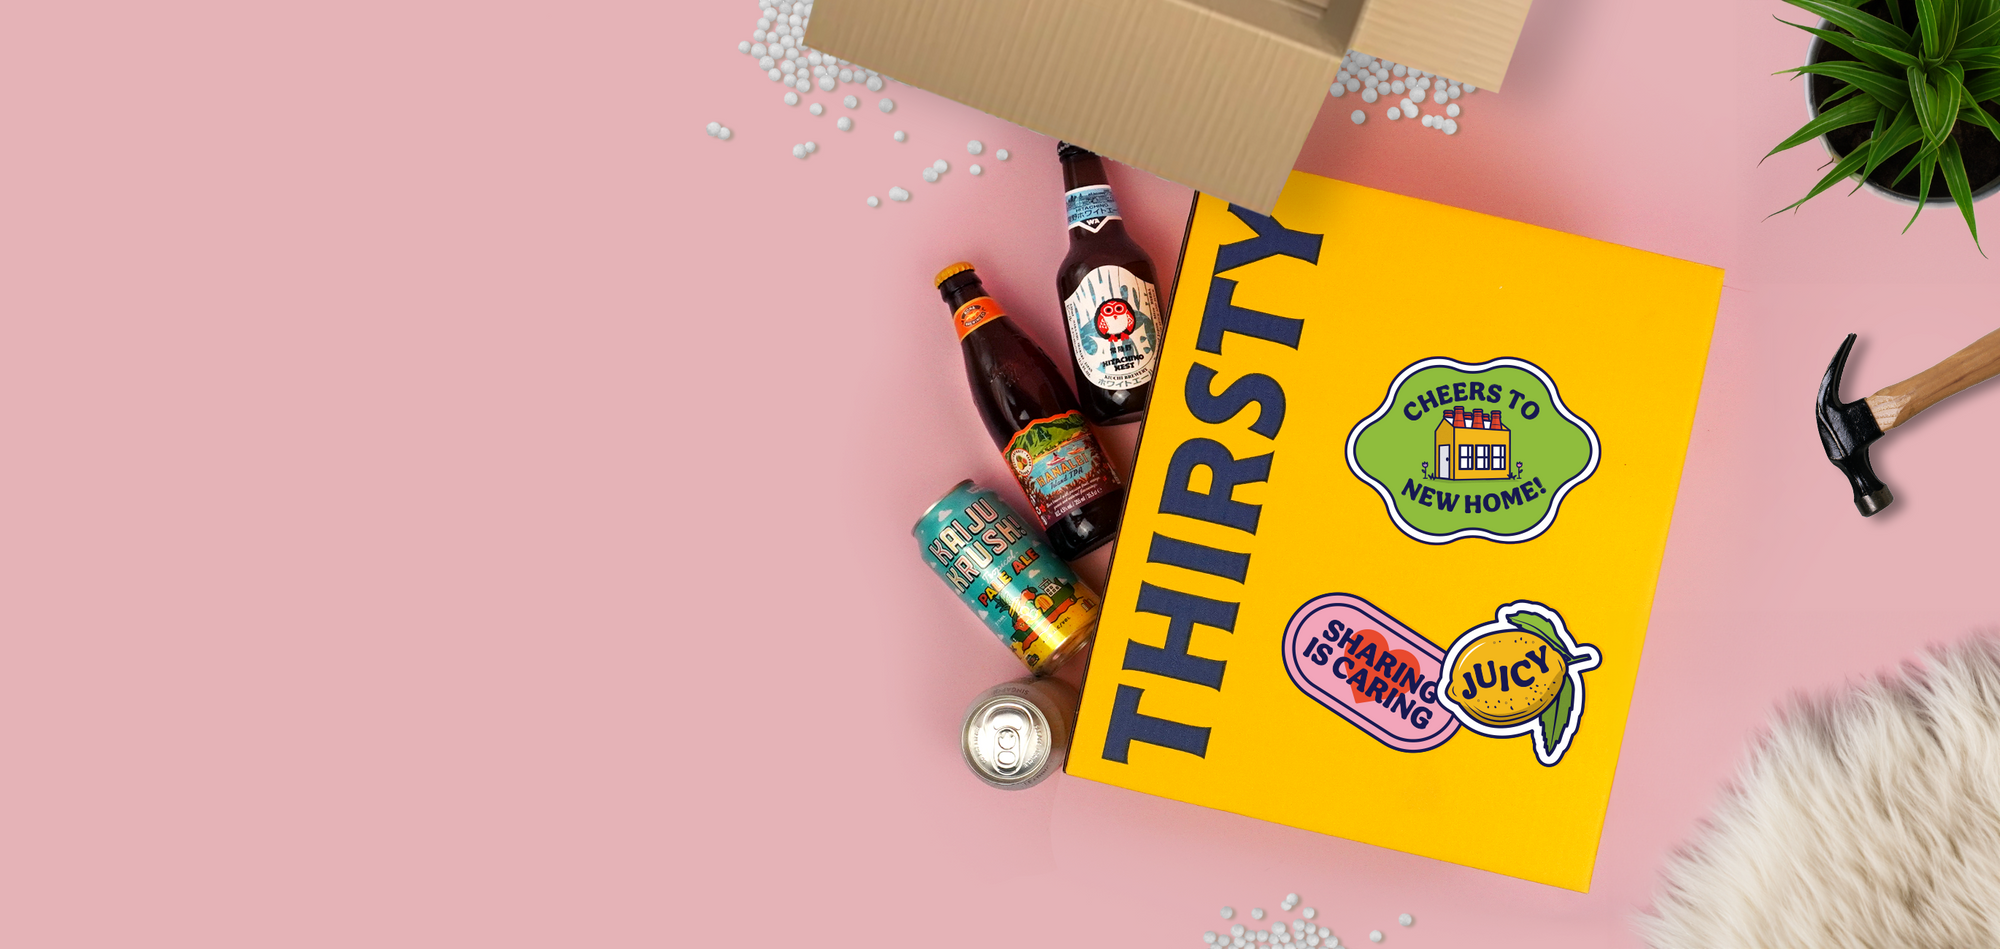 Thirsty 'Live, Laugh, Beer' Housewarming Party Box